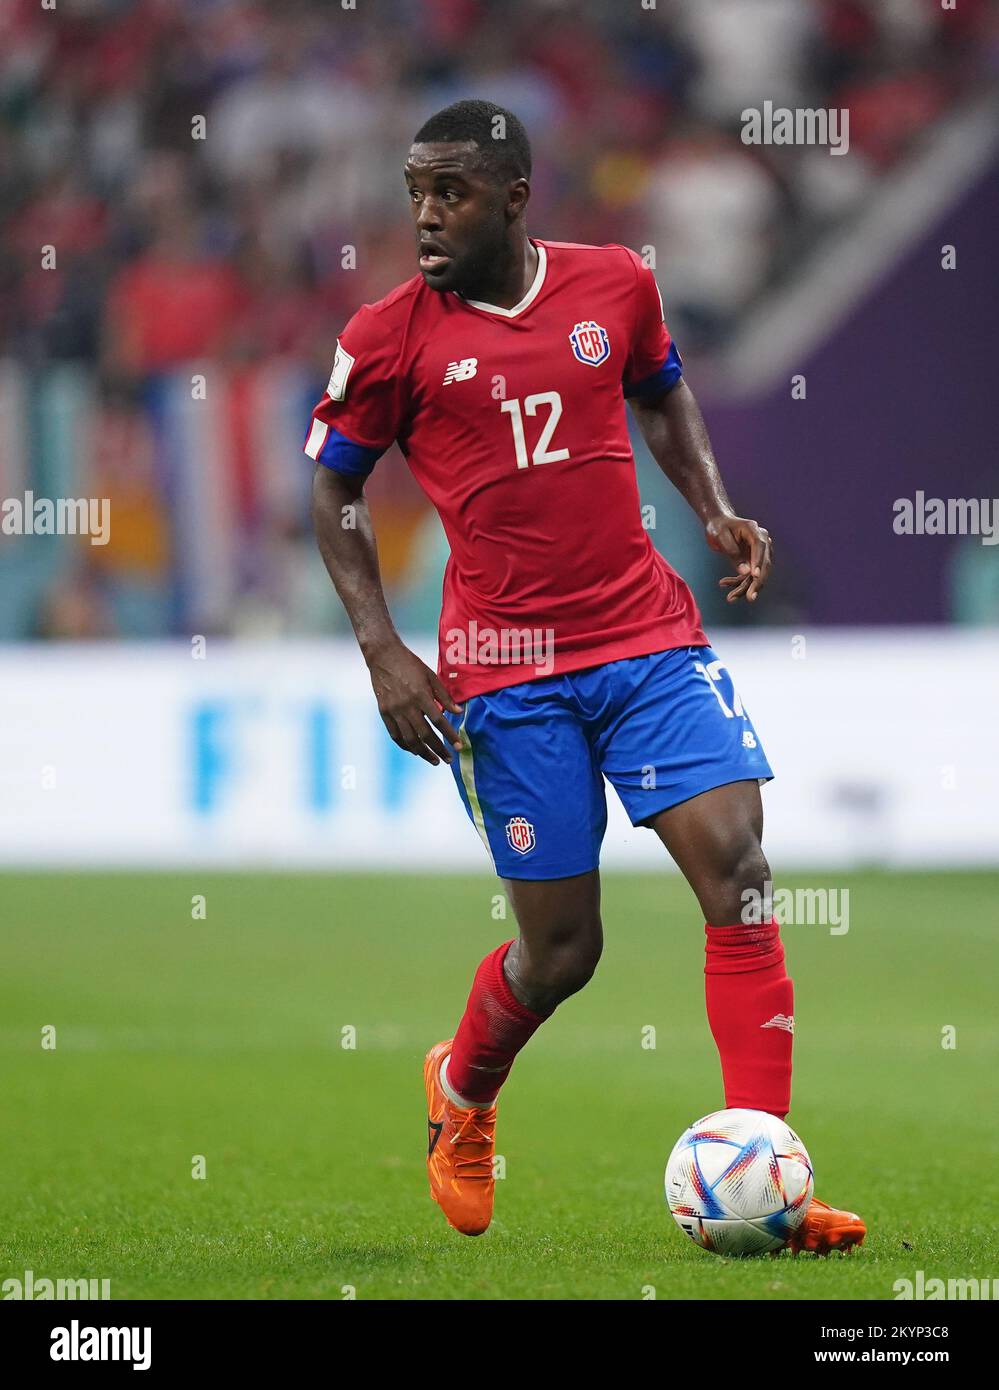 Costa Rica's Joel Campbell during the FIFA World Cup Group E match at the Al Bayt Stadium, Al Khor, Qatar. Picture date: Thursday December 1, 2022. Stock Photo